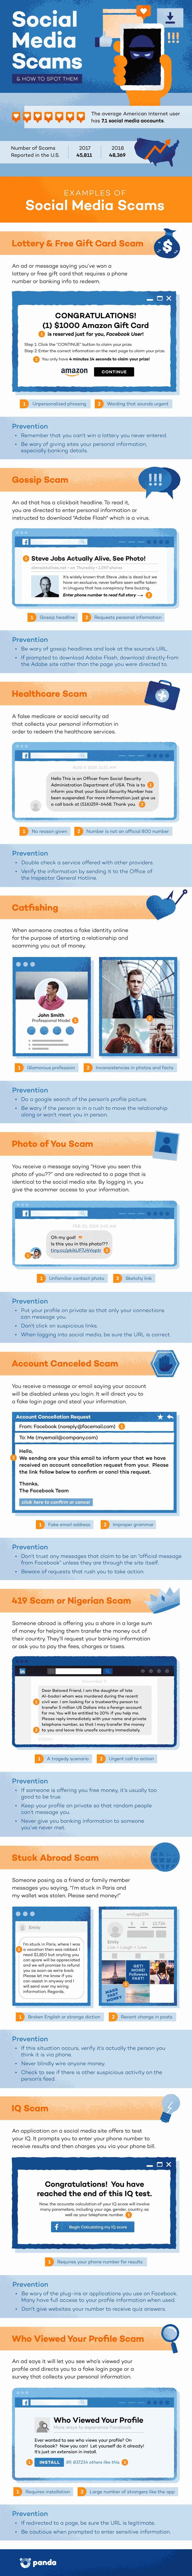 10 Social Media Scams and How to Spot Them